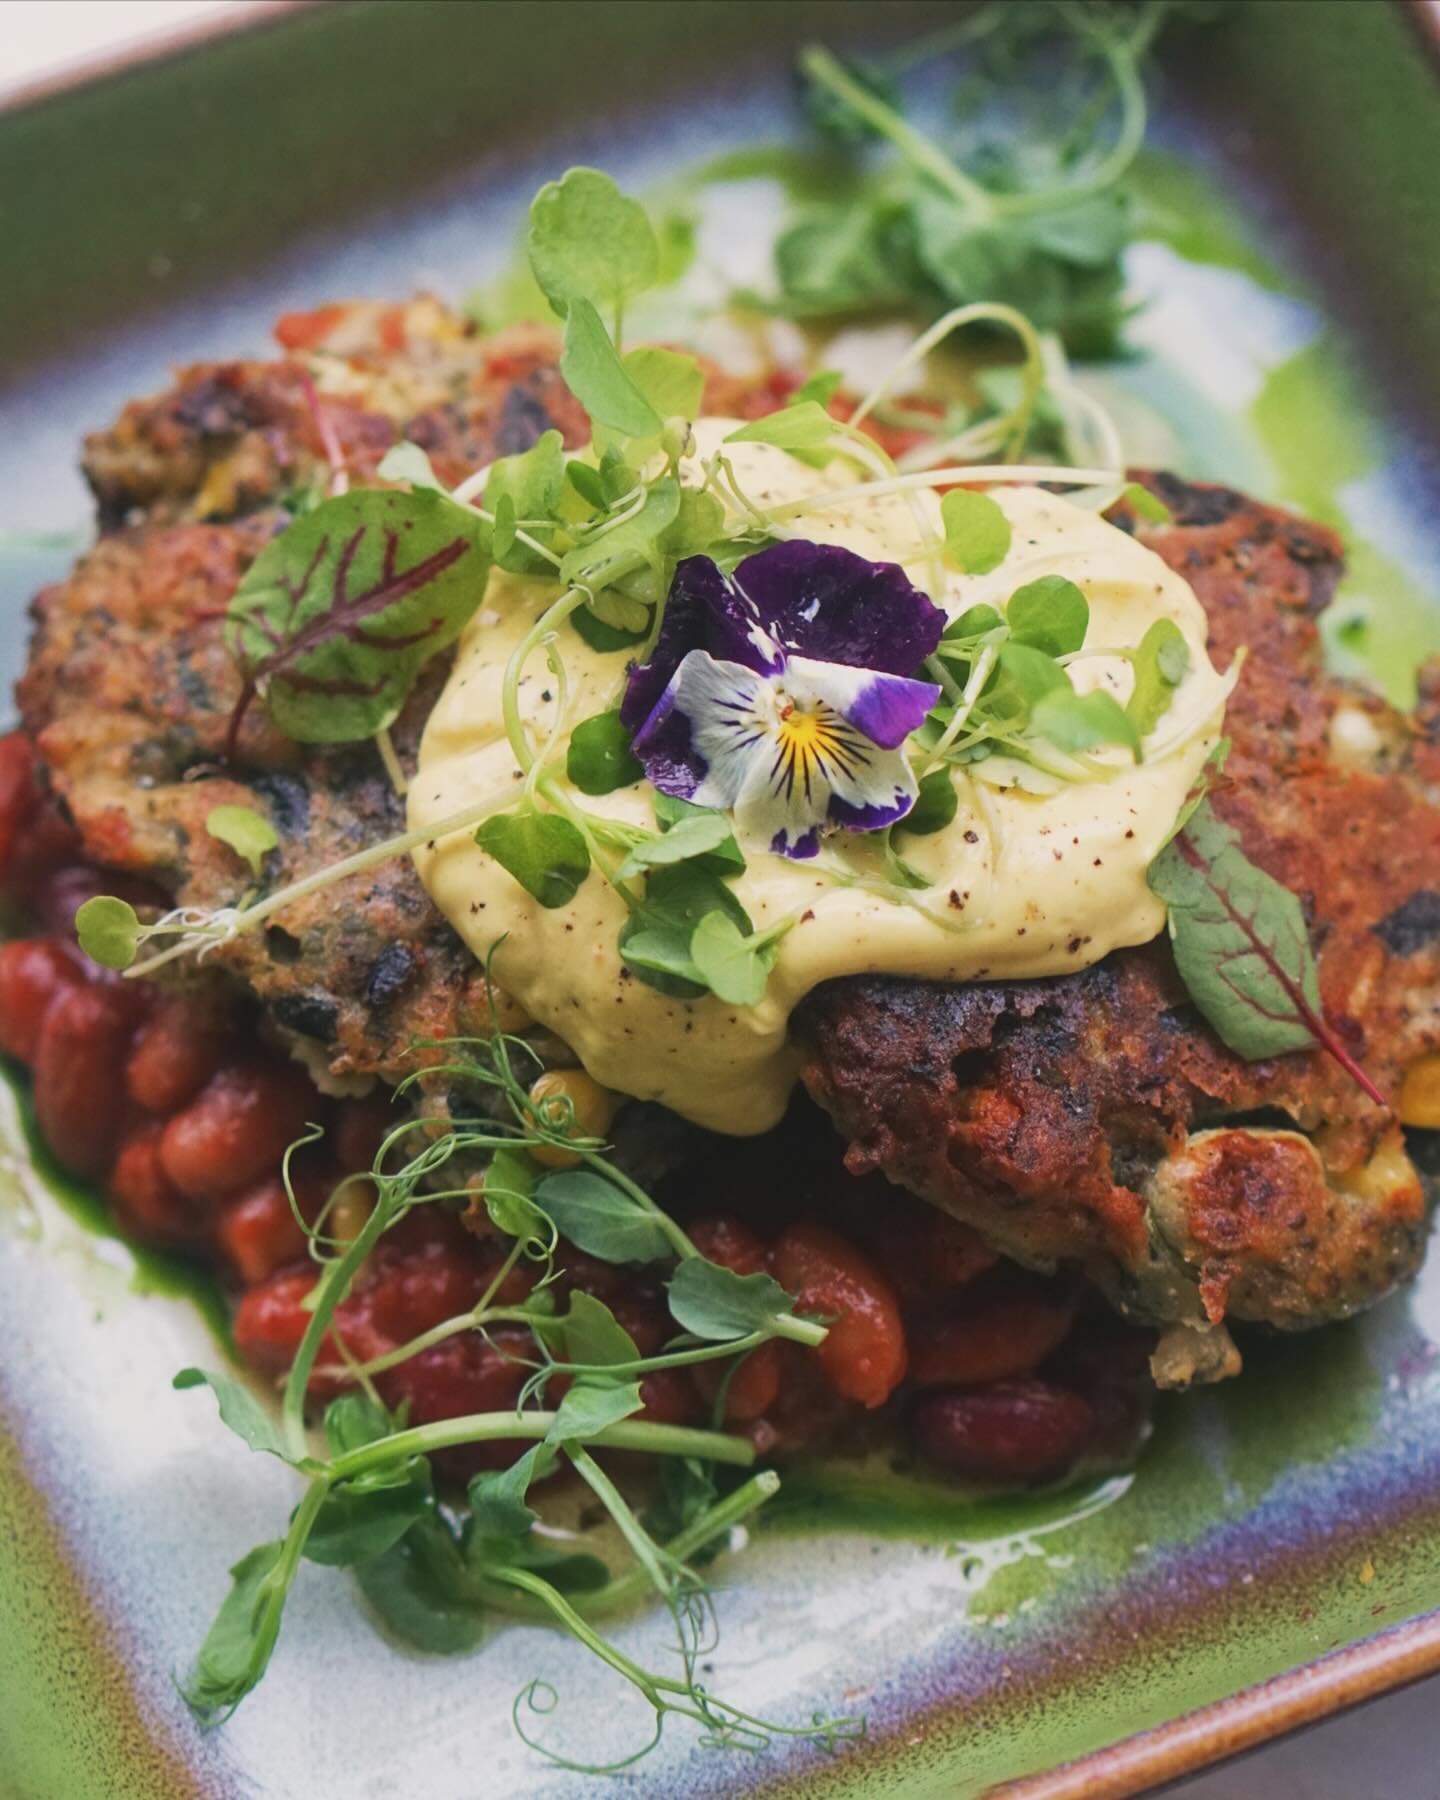 🌱 SPRING MENU 🌼

Last week we launched our new menu and so far we&rsquo;ve had some great feedback! I think this could be our best yet! 🤭

What do you think? 🤔

One of our new dishes featured here:

Harissa Broad Bean Fritters ~ Smokey harissa ho